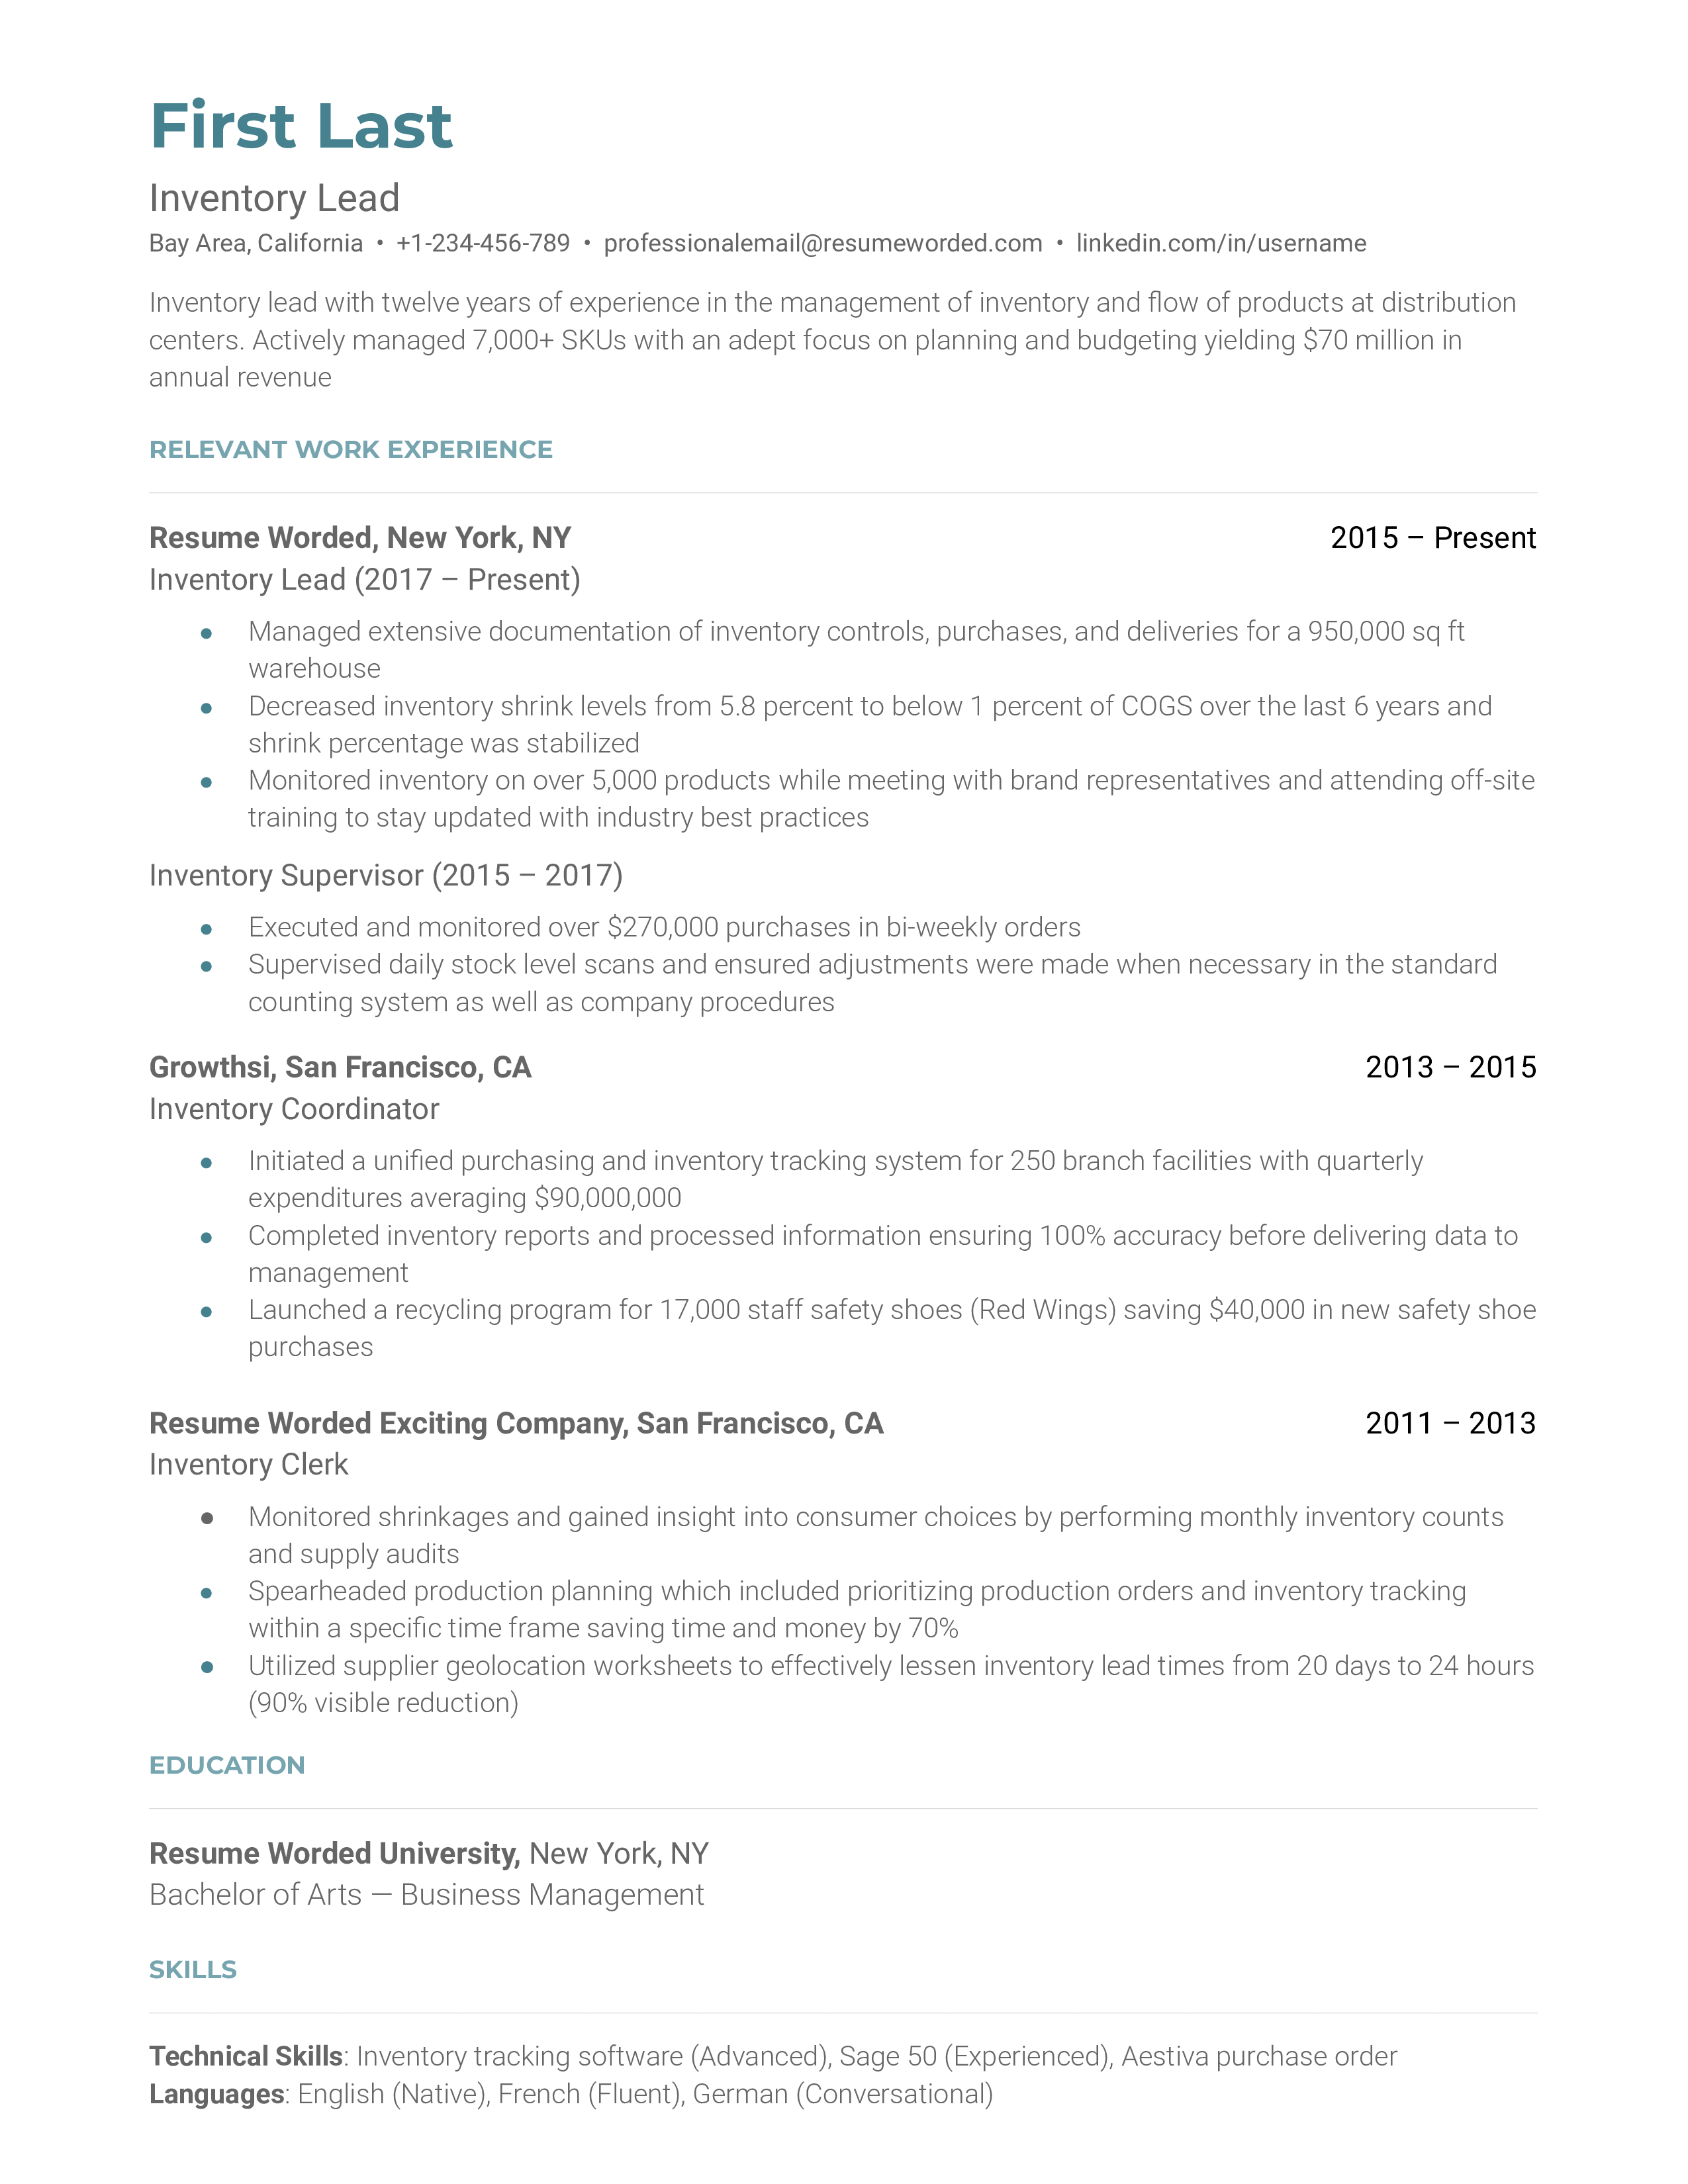 An Inventory Lead resume example highlighting extensive work experience and career growth.